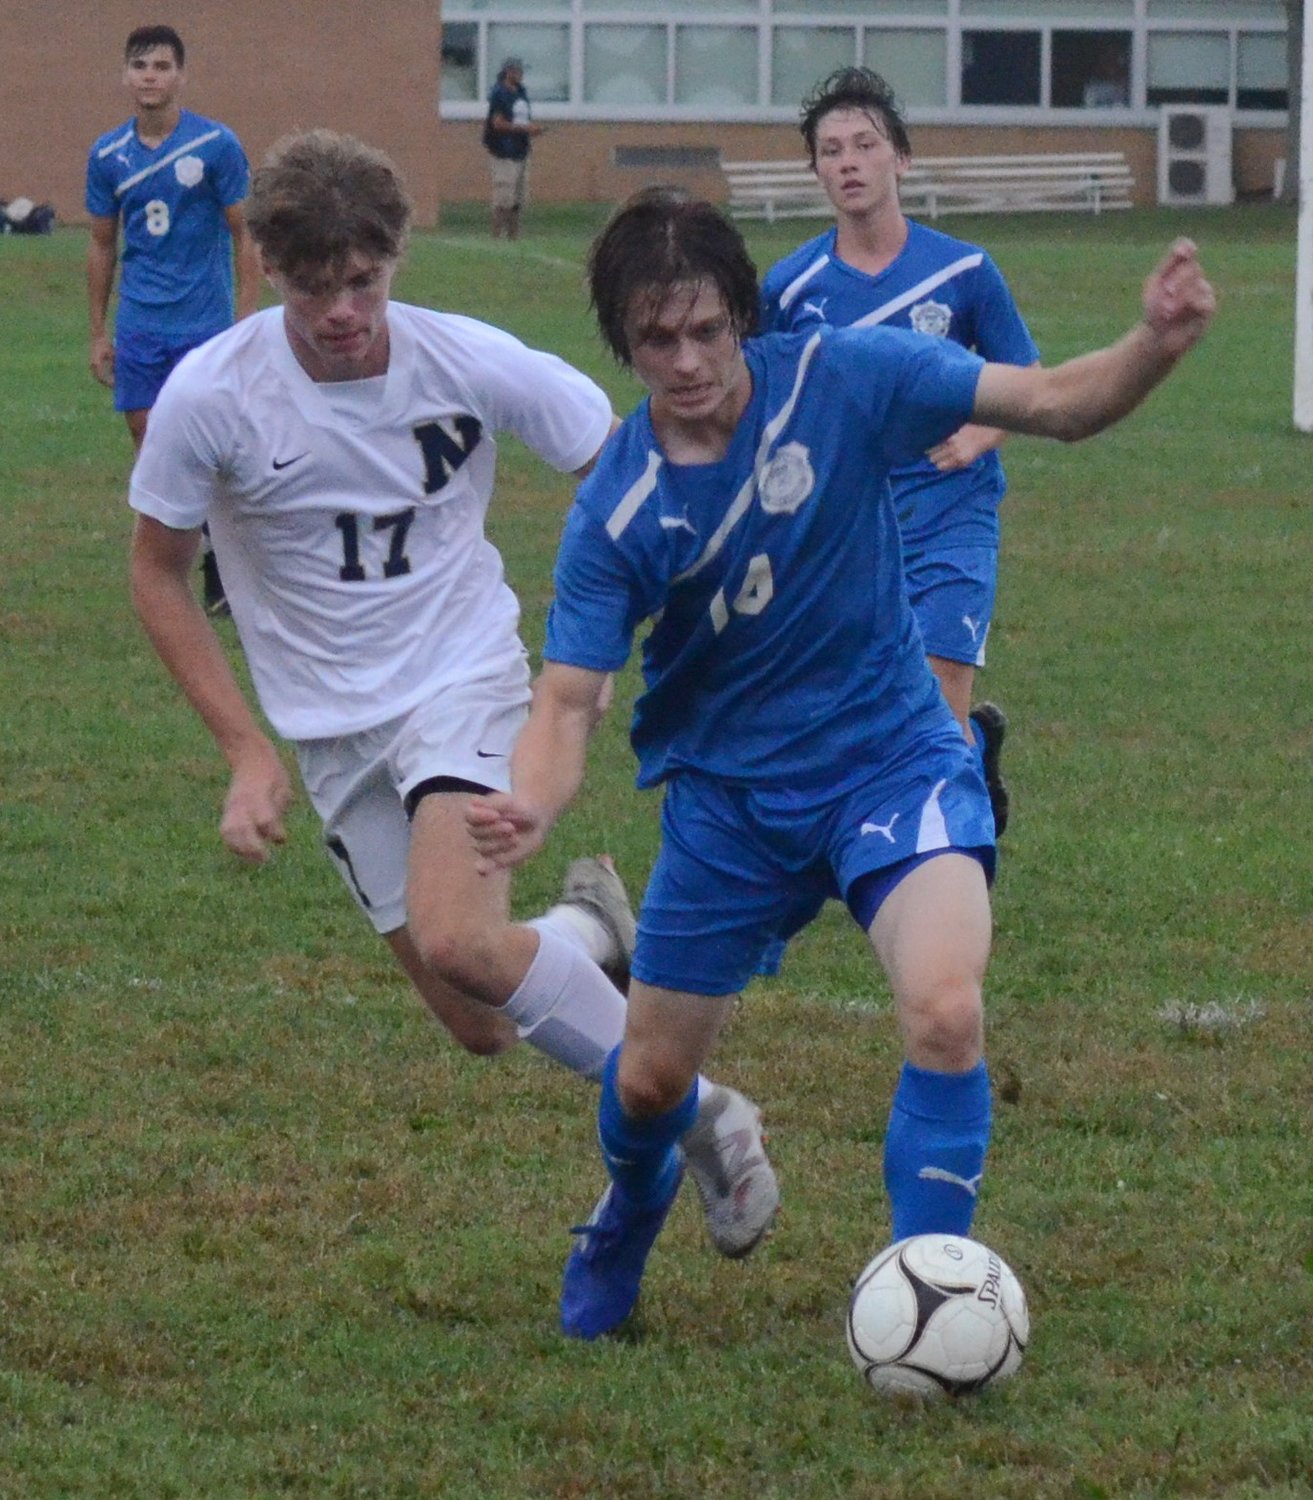 Valley Central’s Sebastien Rockwood brings the ball down the field as Newburgh’s Ryan Kirby pursues during Thursday’s OCIAA boys’ soccer game at Valley Central high School in Montgomery.